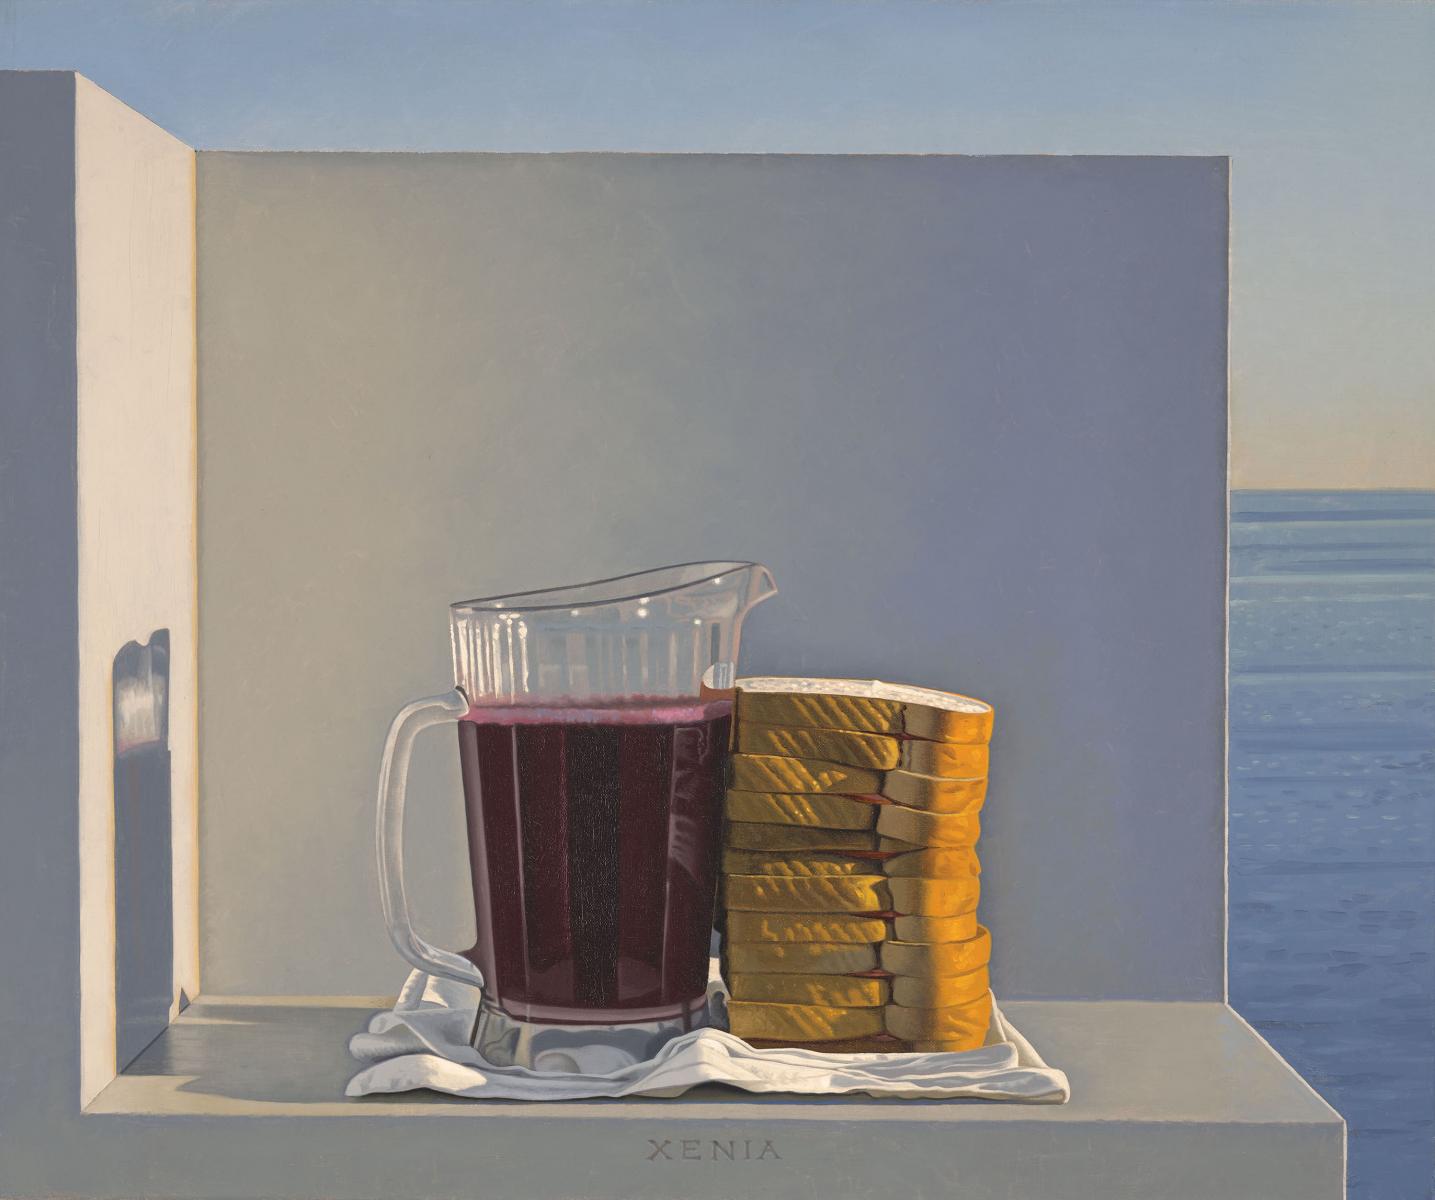 Still Life with Grape Juice and Sandwiches (Xenia) by David Ligare